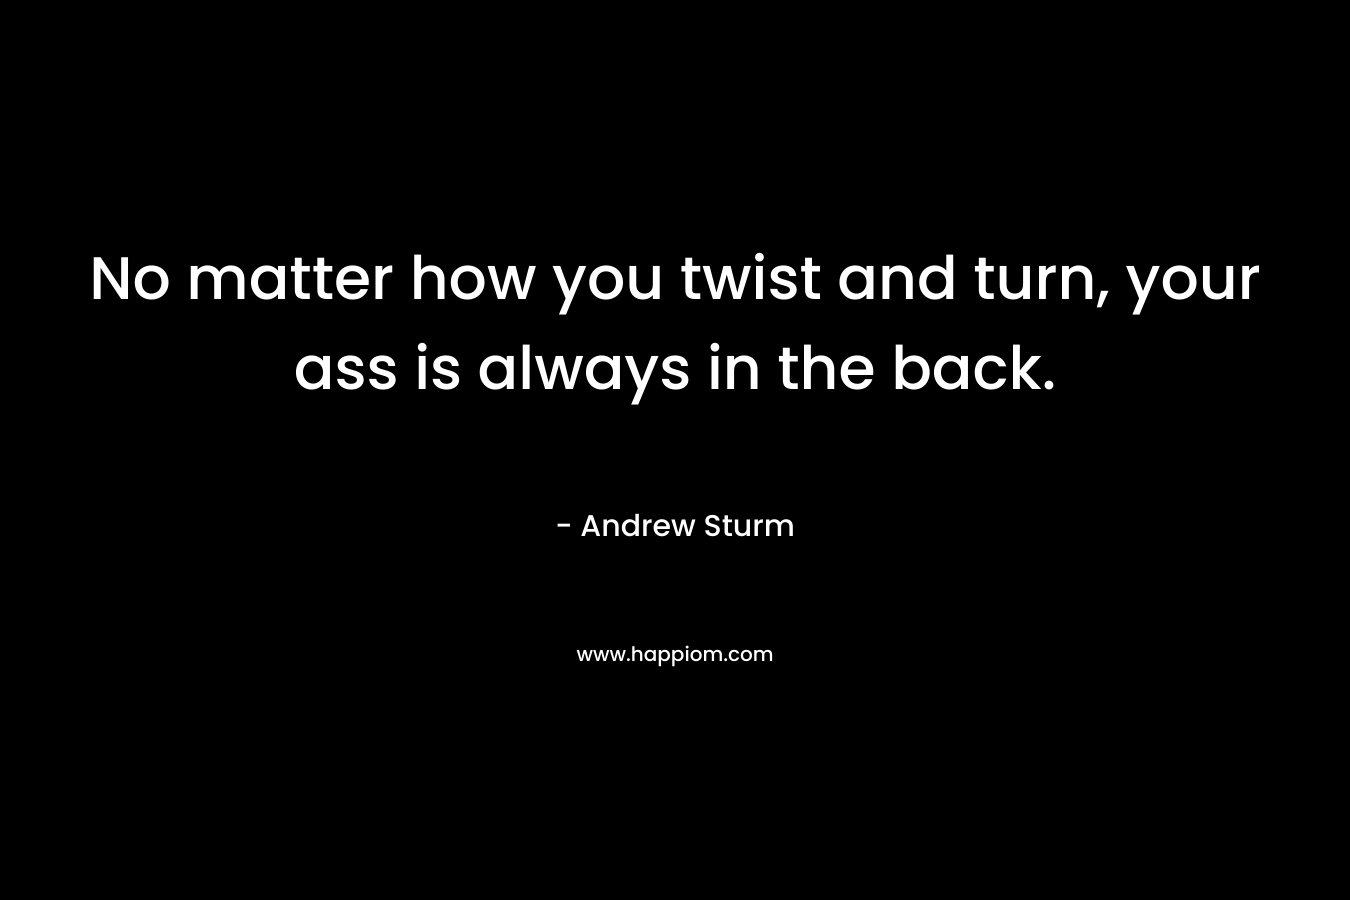 No matter how you twist and turn, your ass is always in the back. – Andrew Sturm